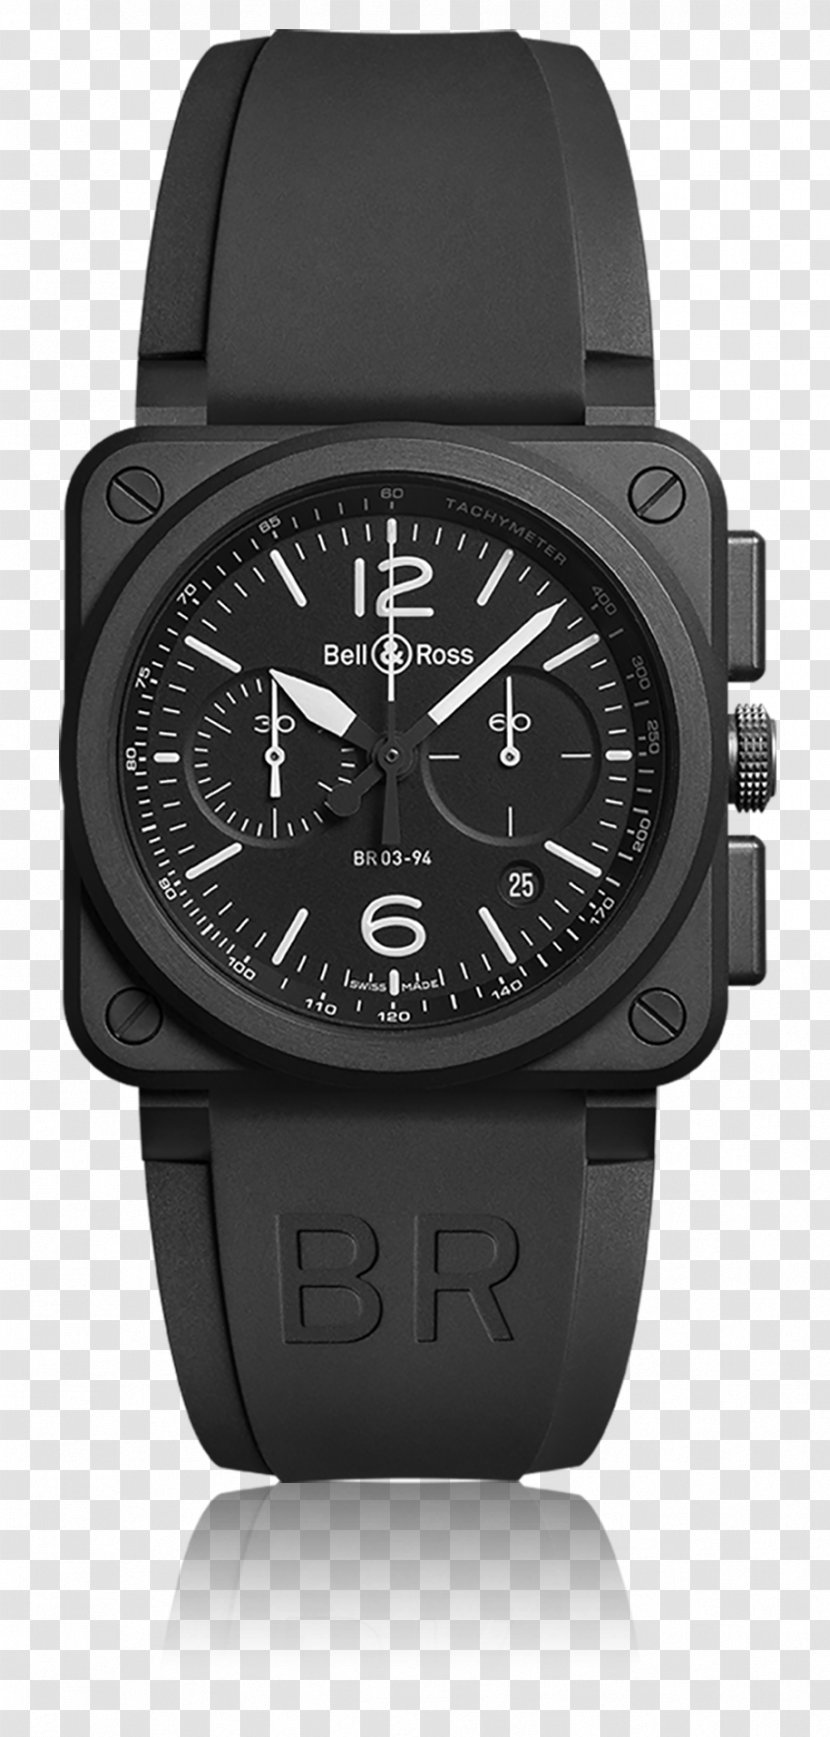 Baselworld Bell & Ross, Inc. Chronograph Watch - Black Transparent PNG